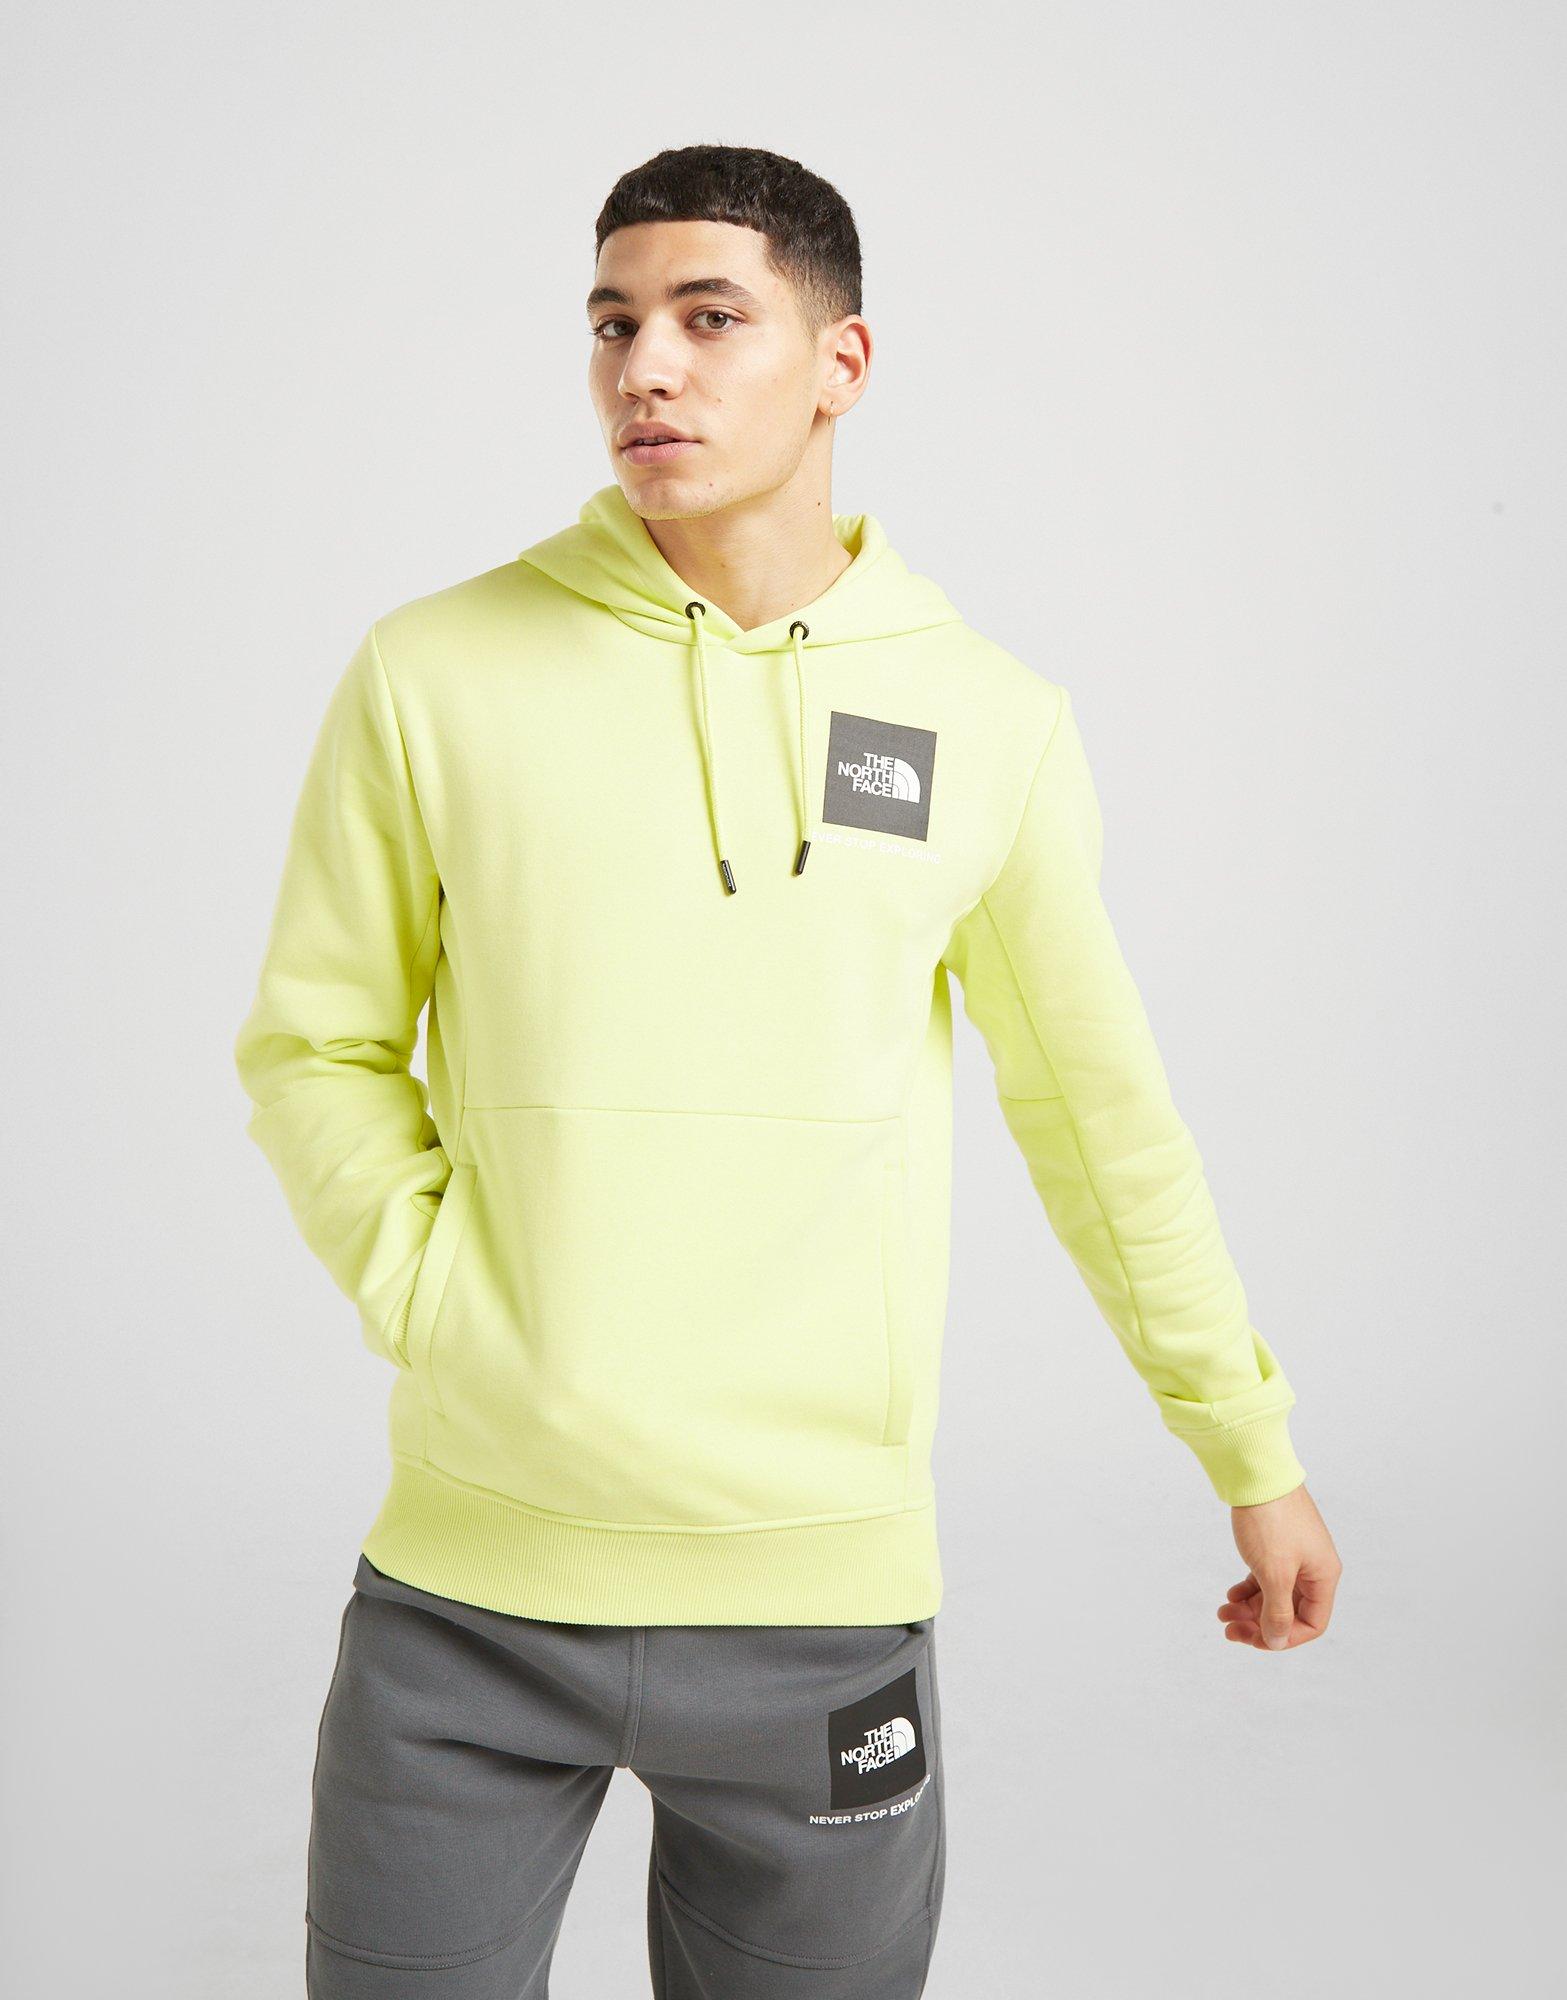 fine box hoodie north face